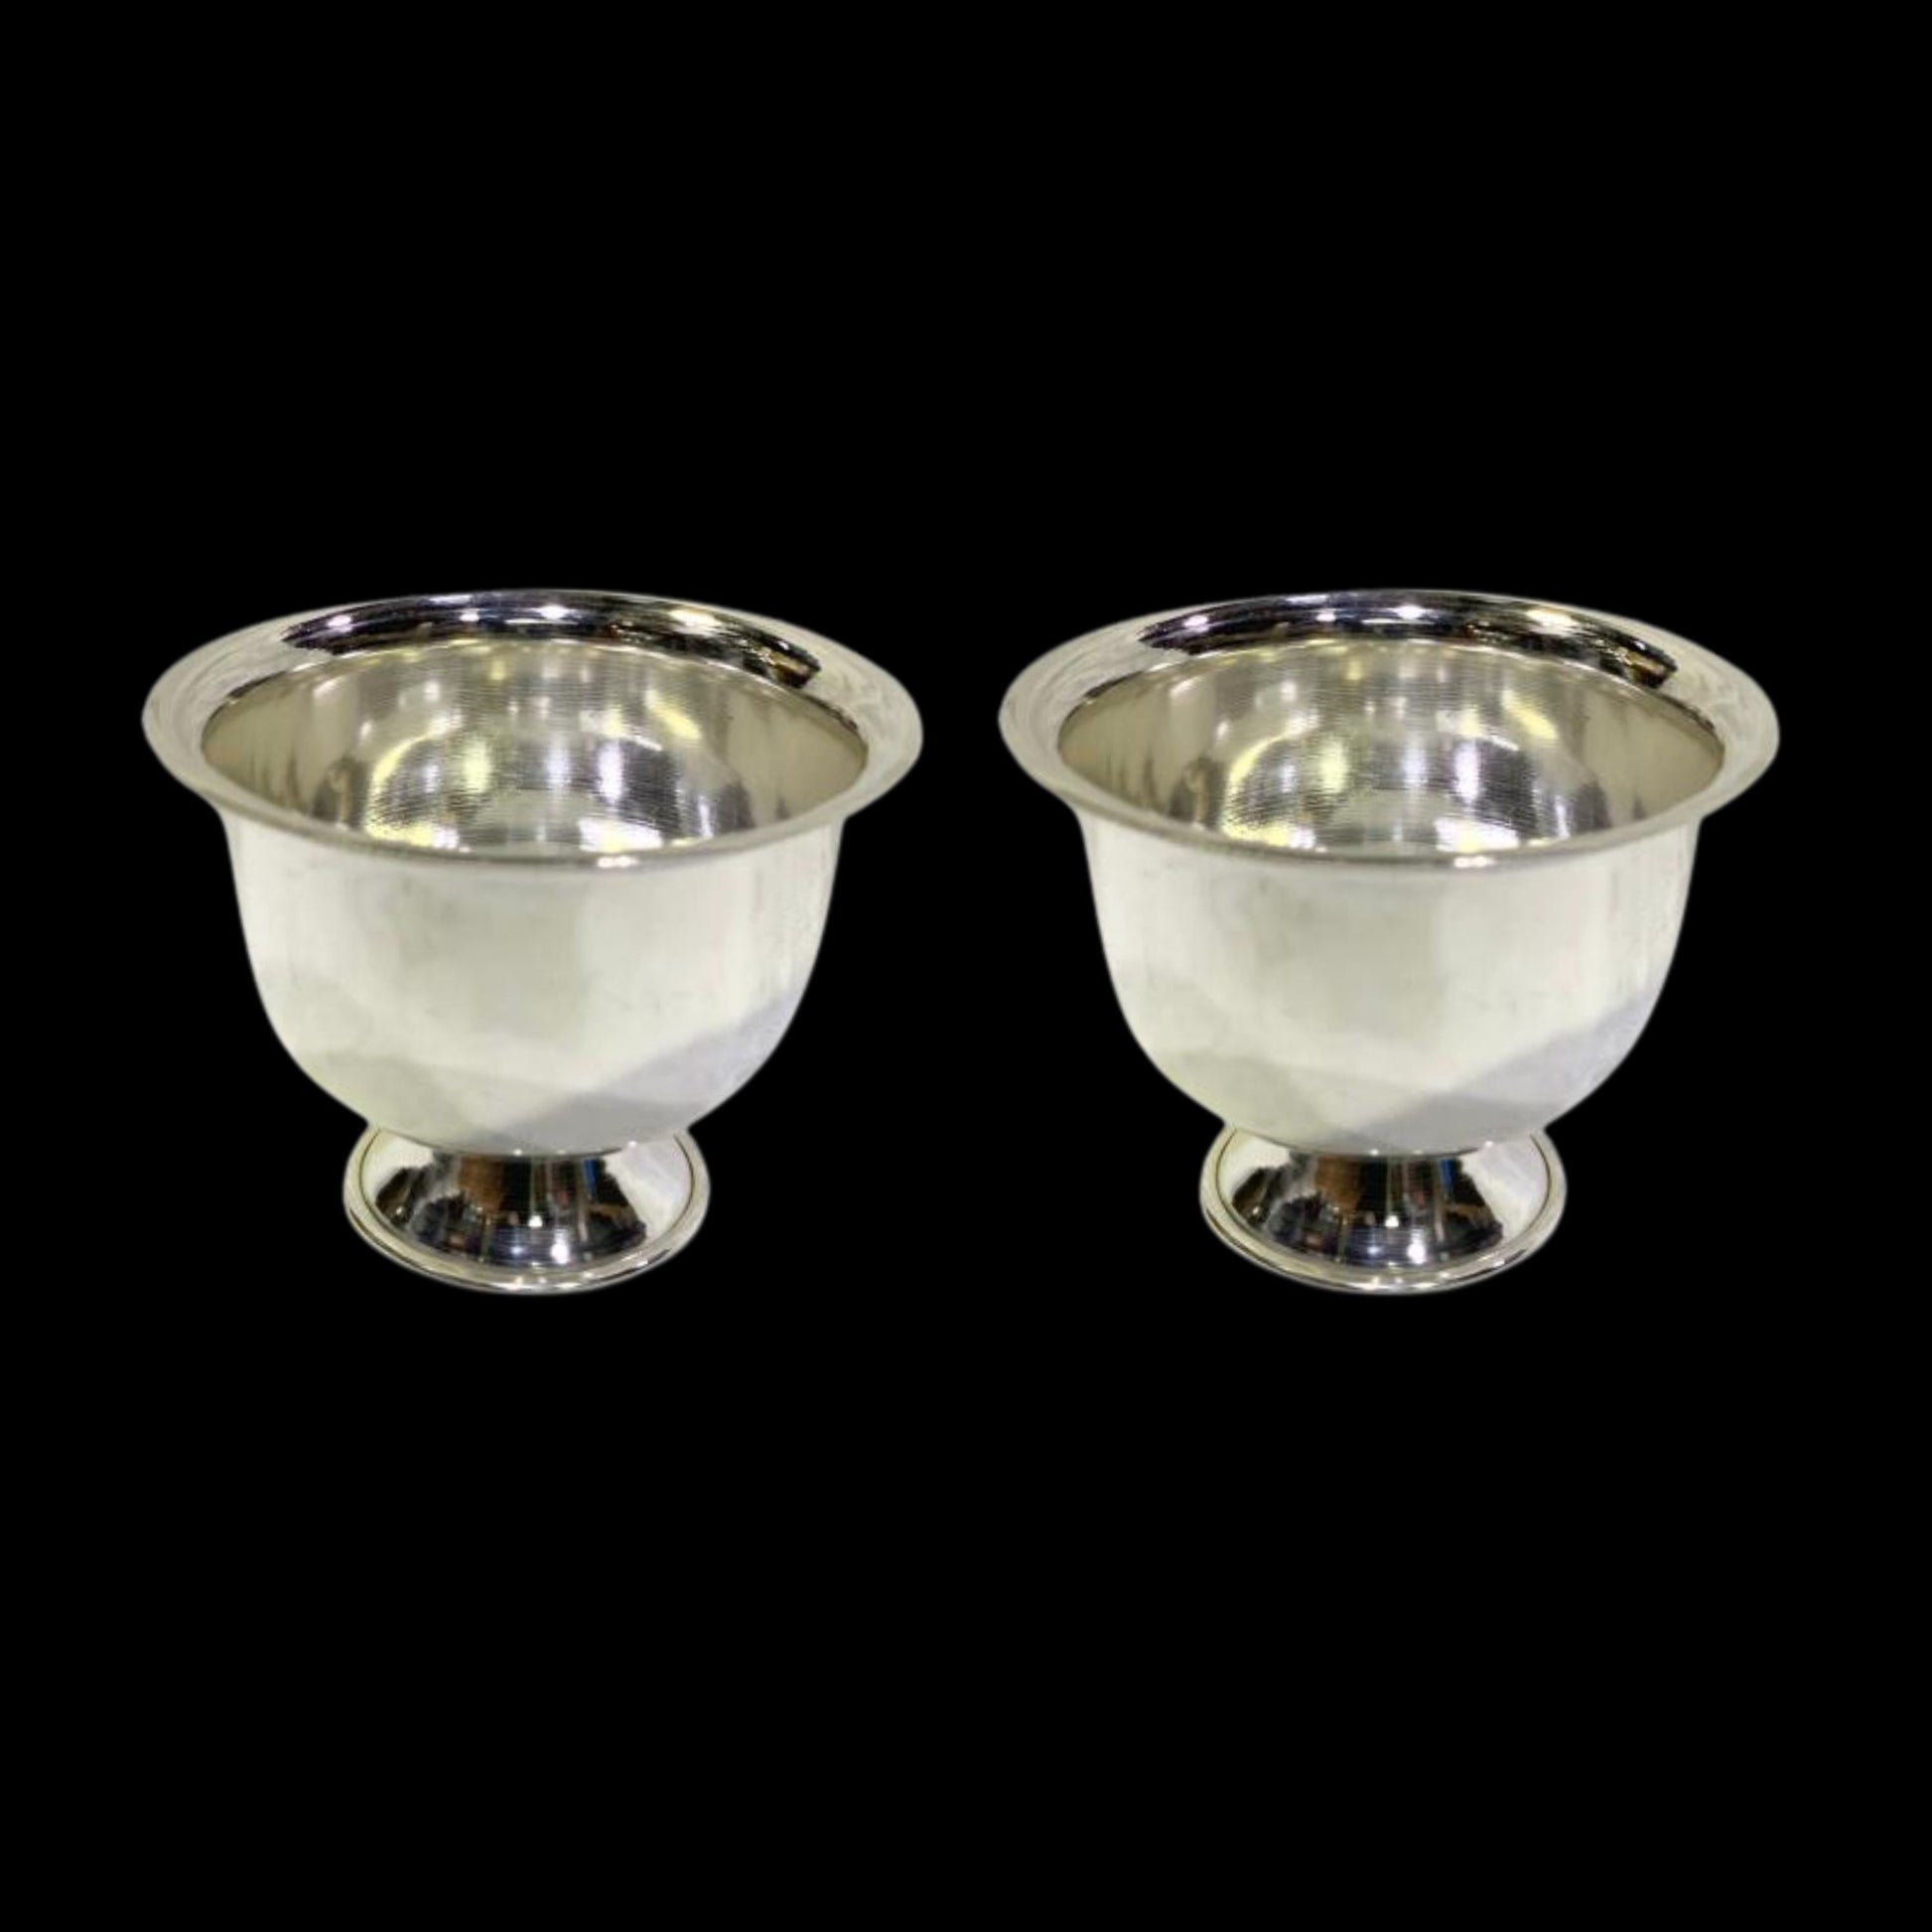 42 gms Pure Silver Padam Cups (Set Of 2) - Mirror Finished